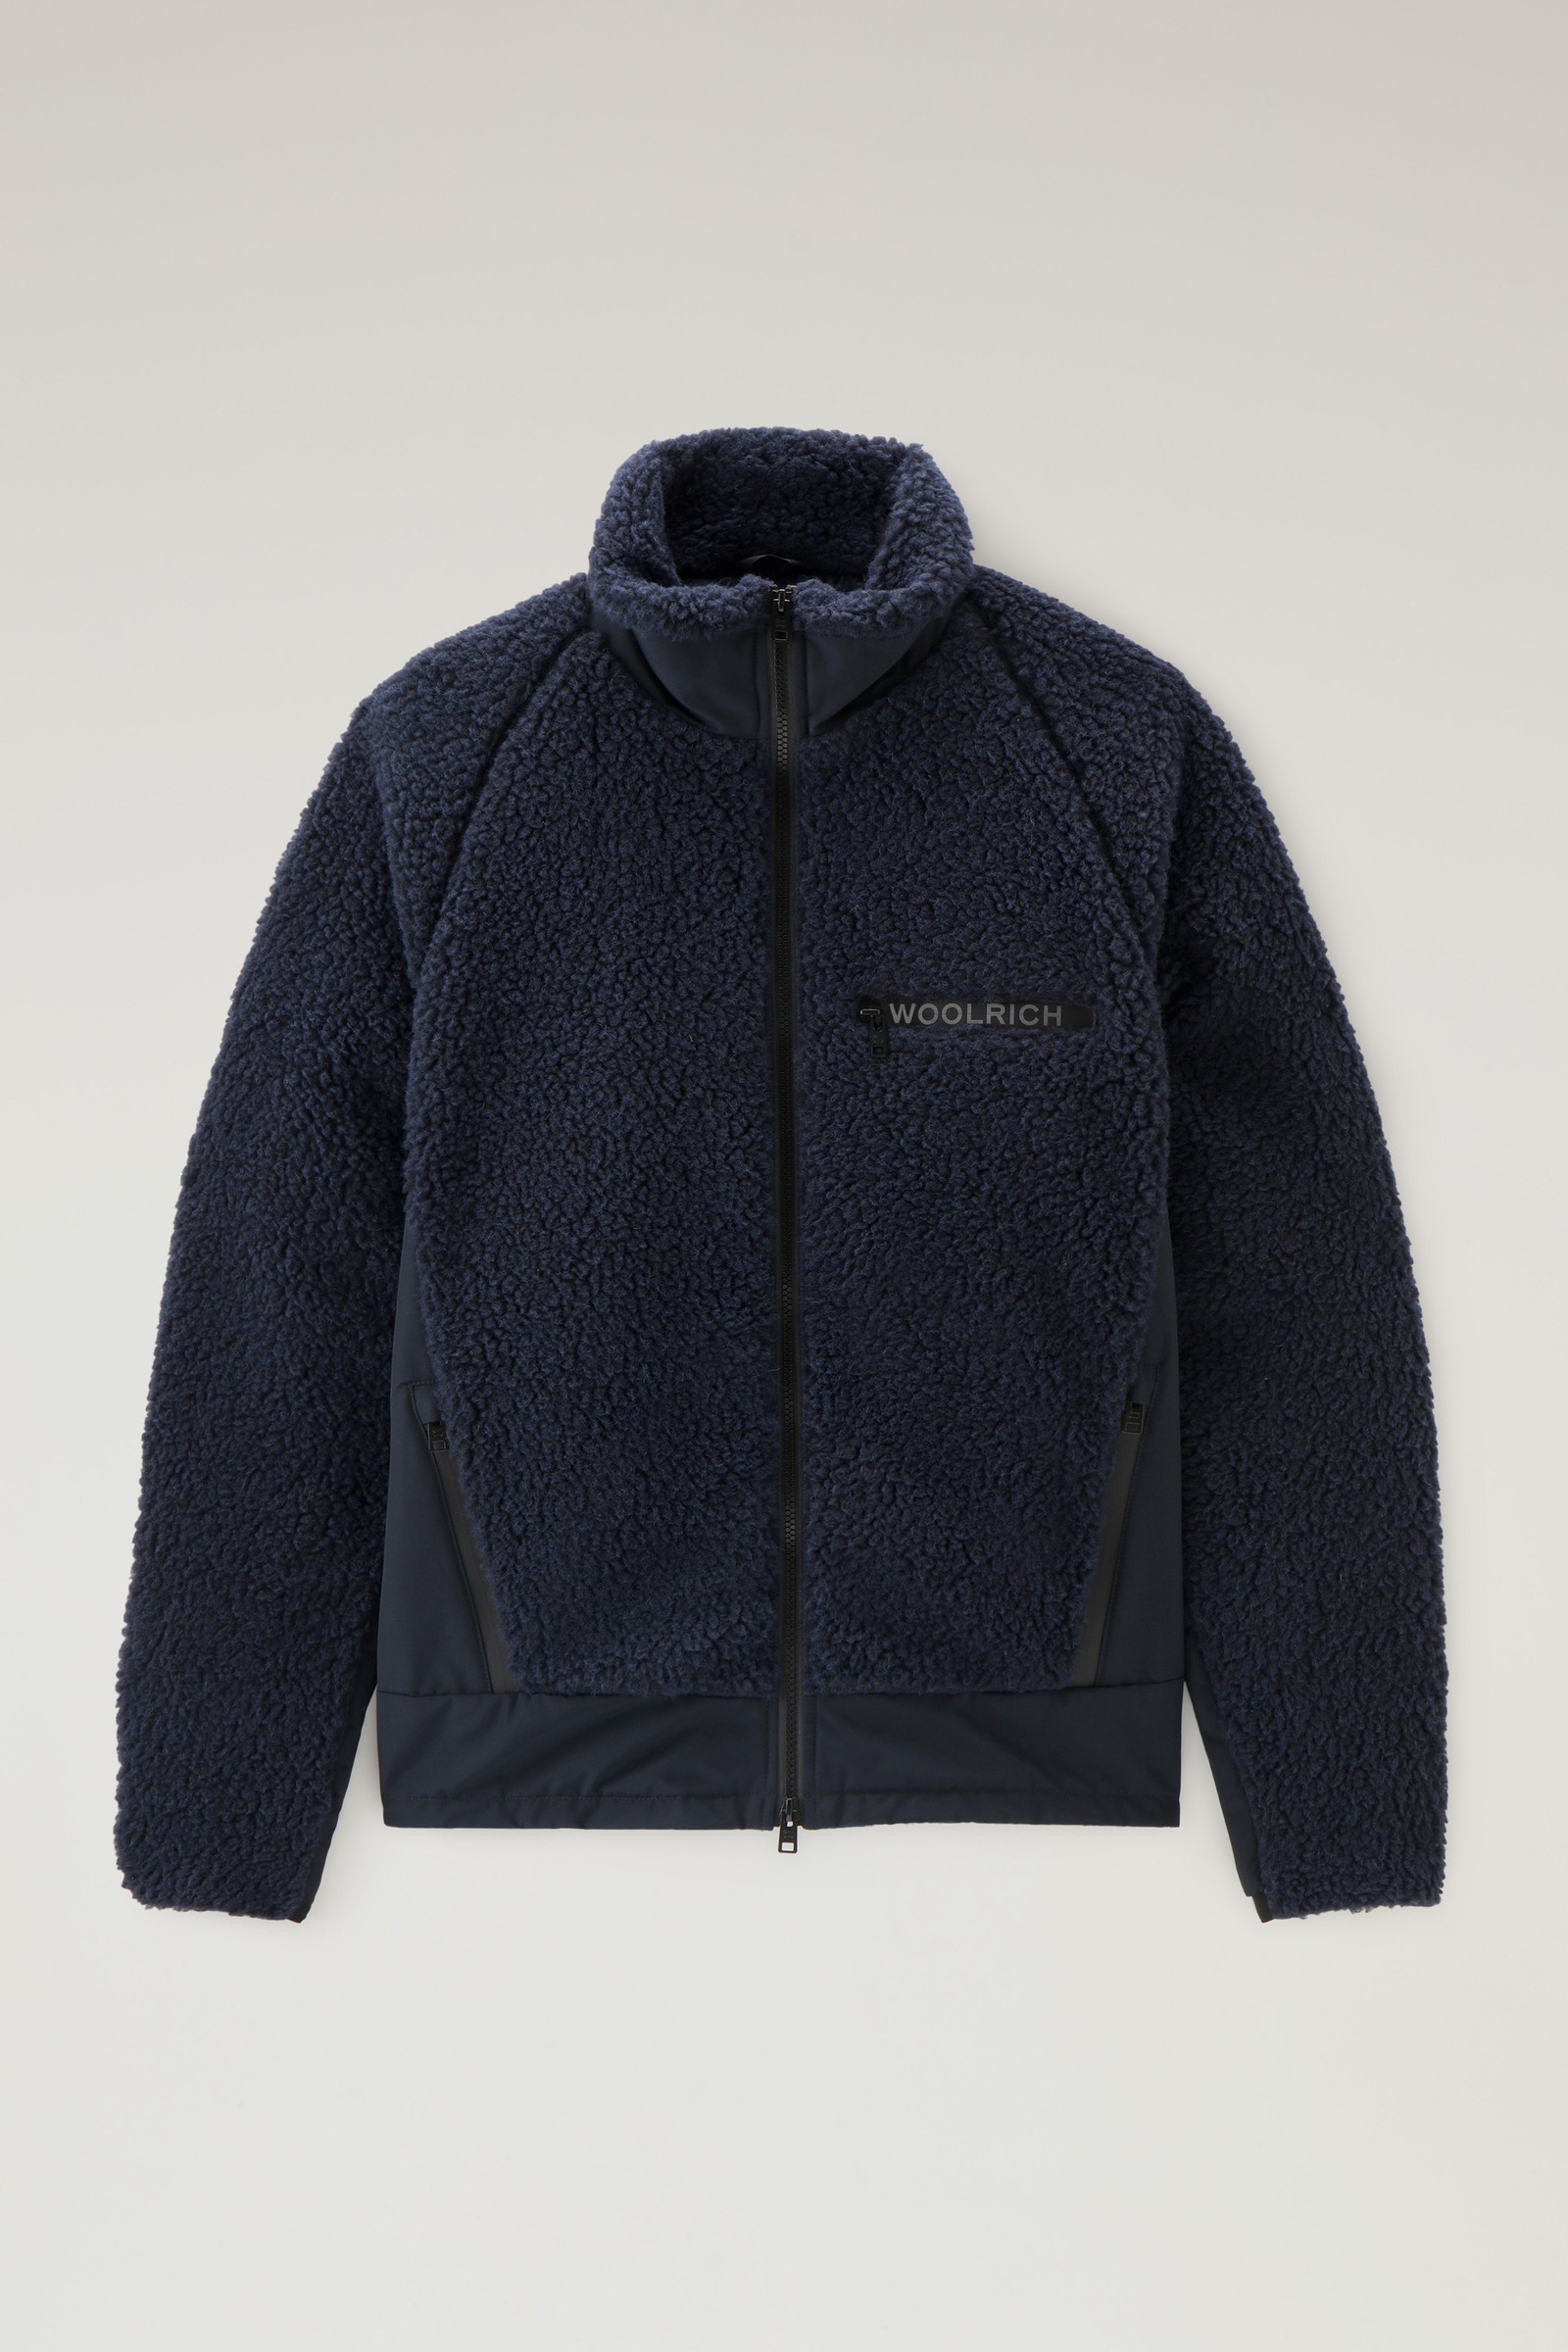 Womens Mens Clothing Mens Jackets Casual jackets Save 54% Woolrich Wool Sherpa Hybrid Blue Jacket 